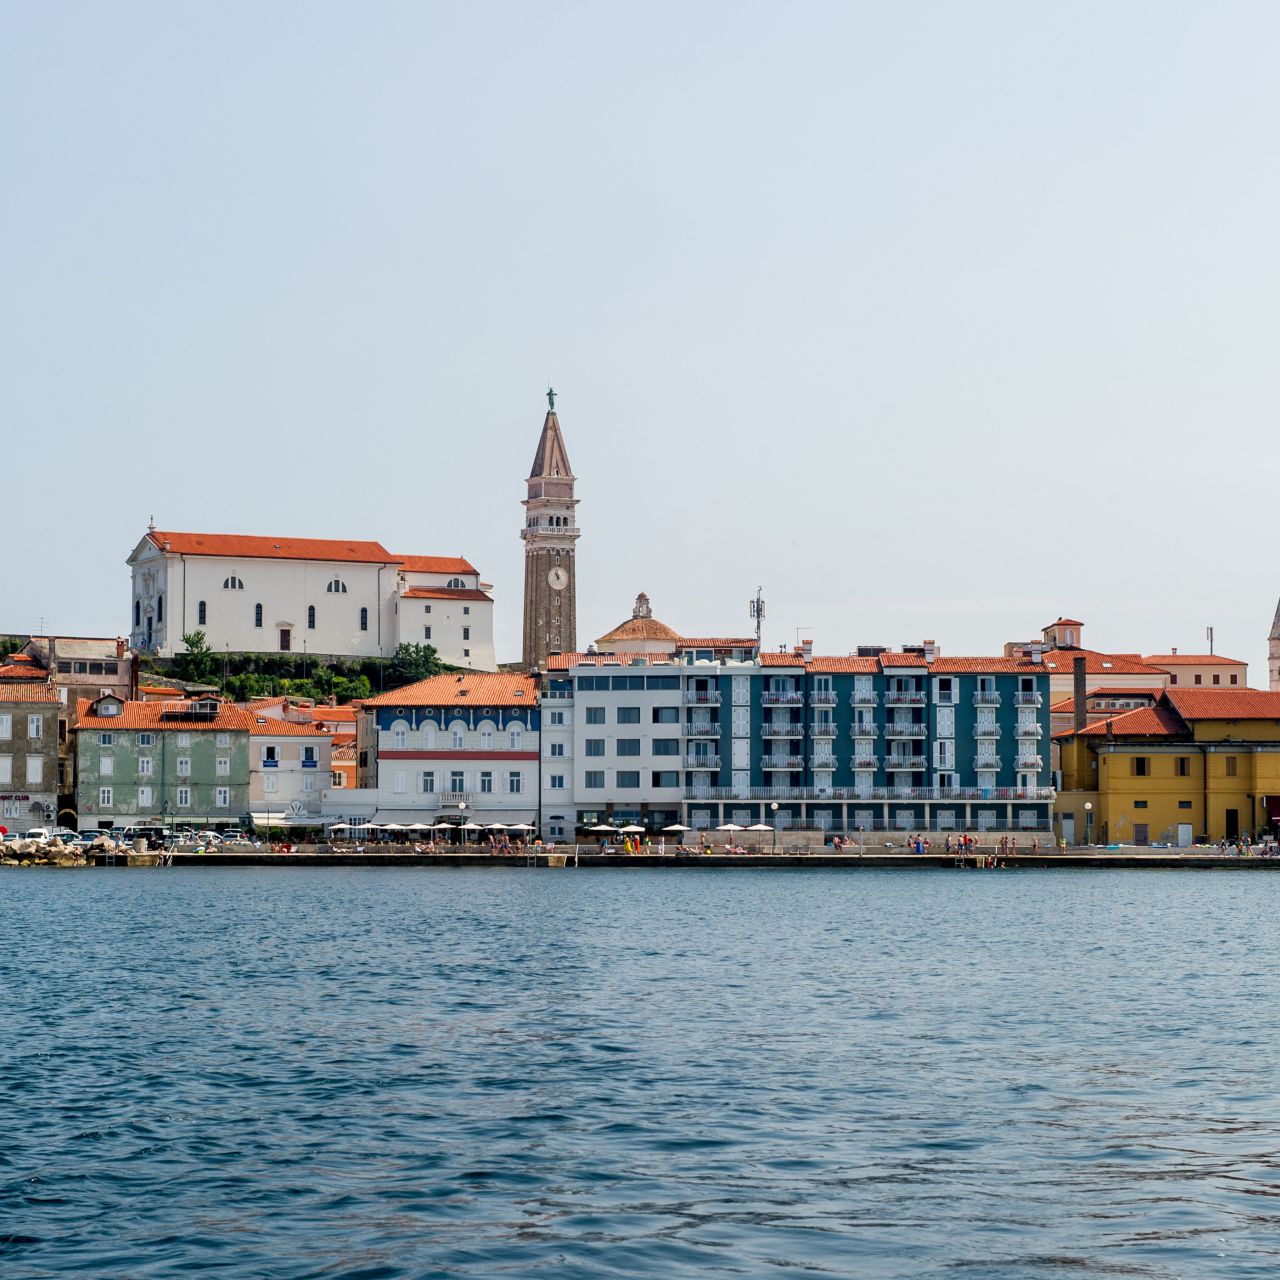 Hotel Piran - Great prices at HOTEL INFO